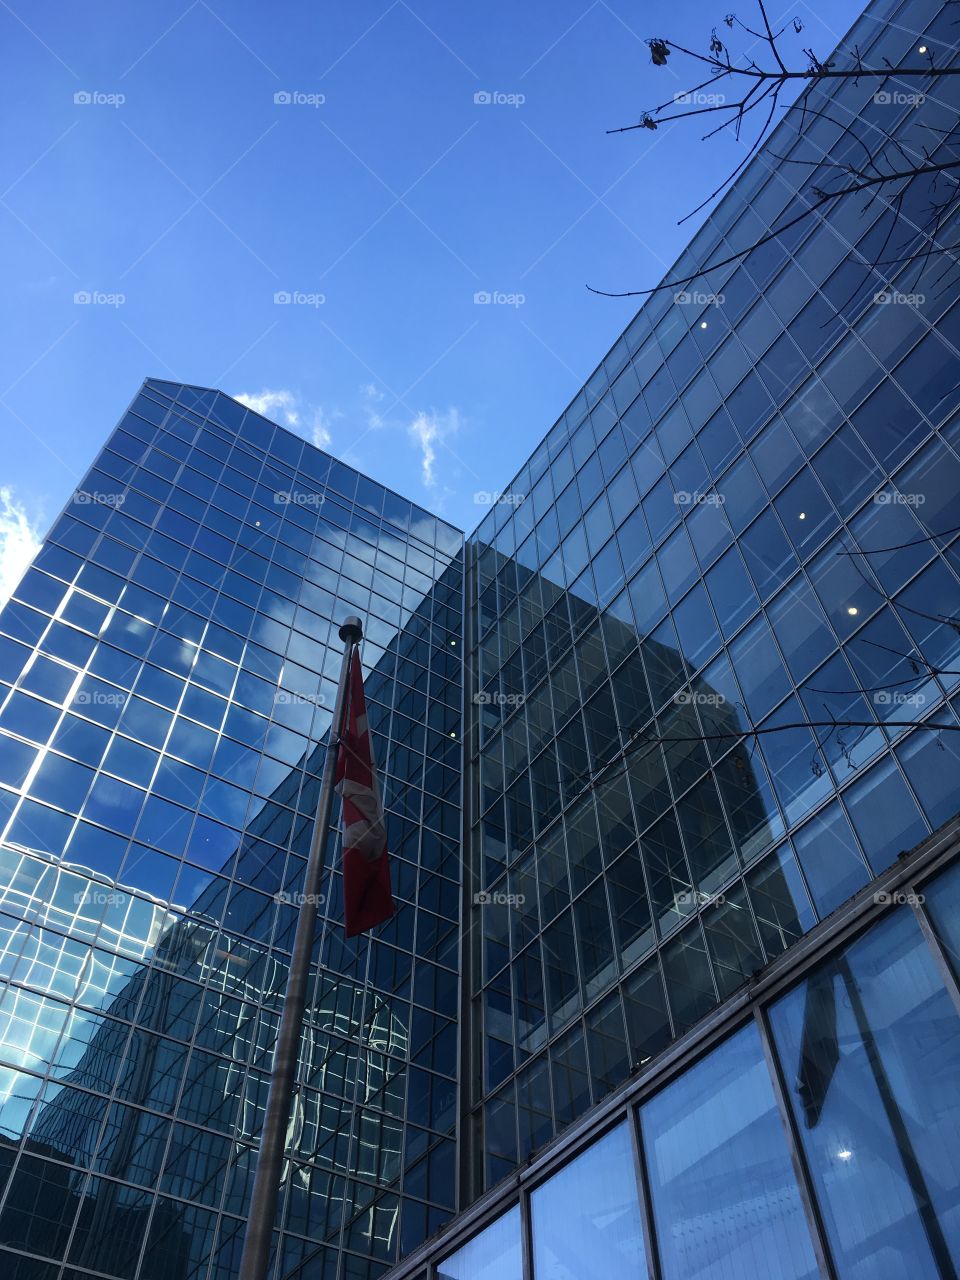 Glass building with Canadian flag.